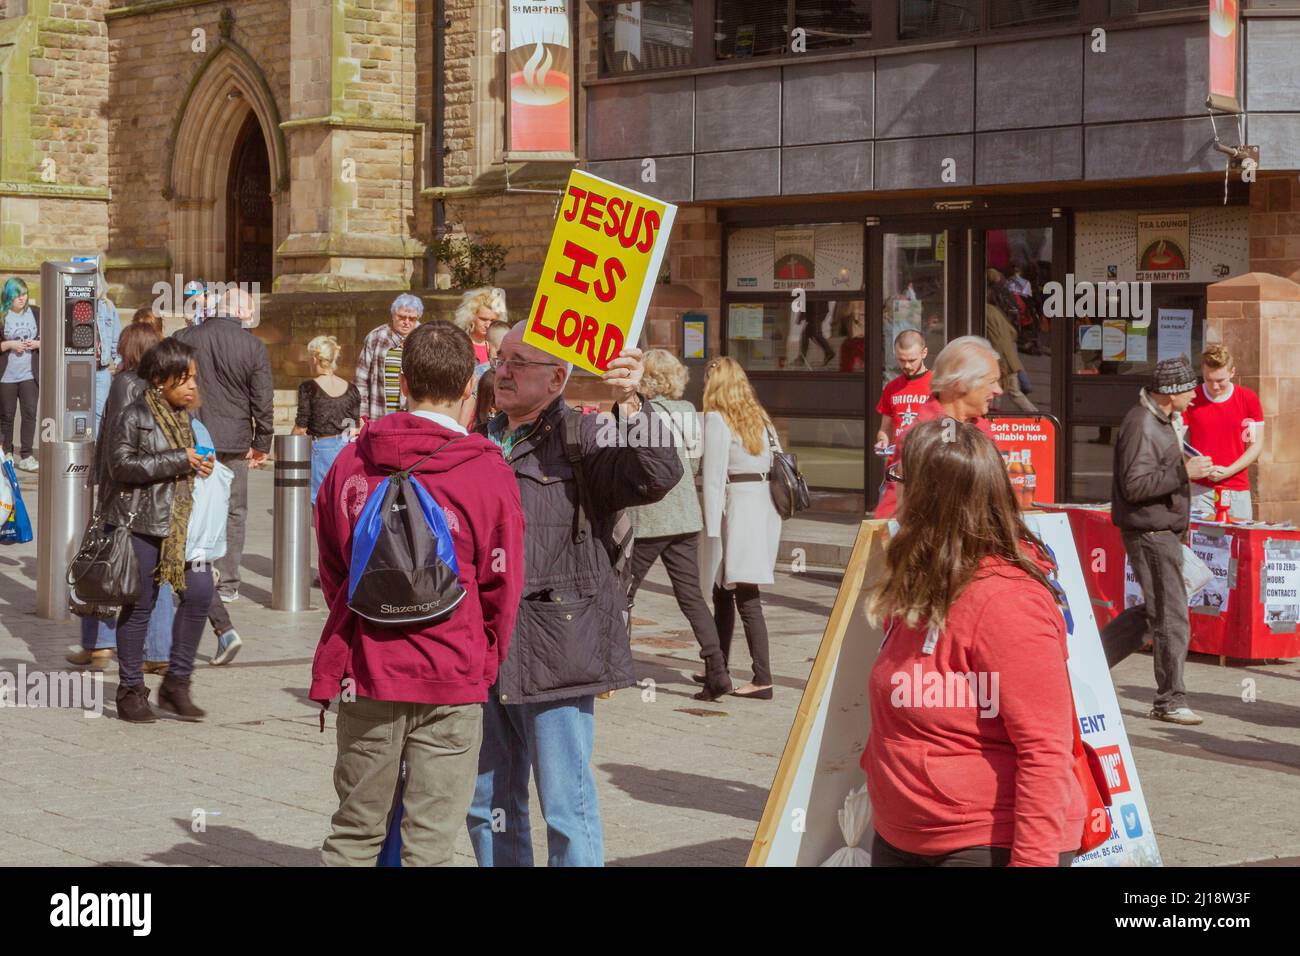 A street preacher holds up a sign saying Jesus is Lord in a busy city centre shopping area. Stock Photo